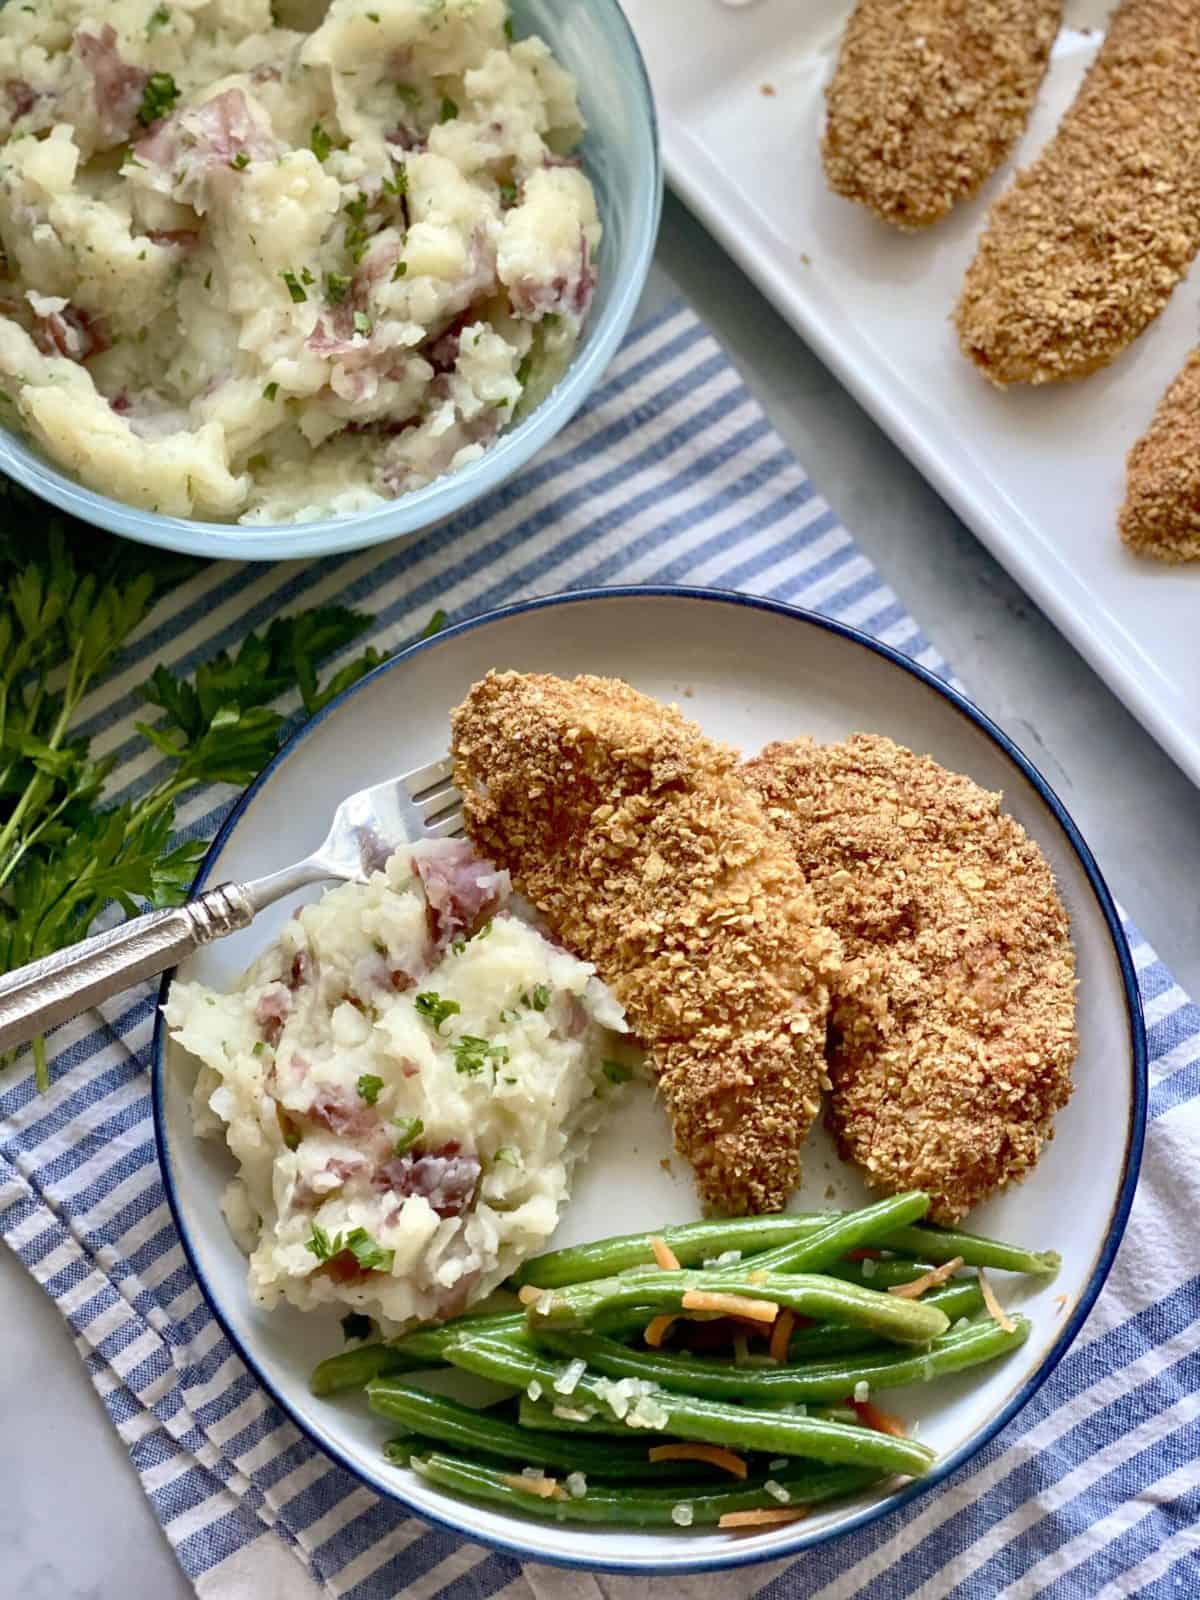 Top view of Potato and cauliflower mash on a white plate served with fried chicken and green beans